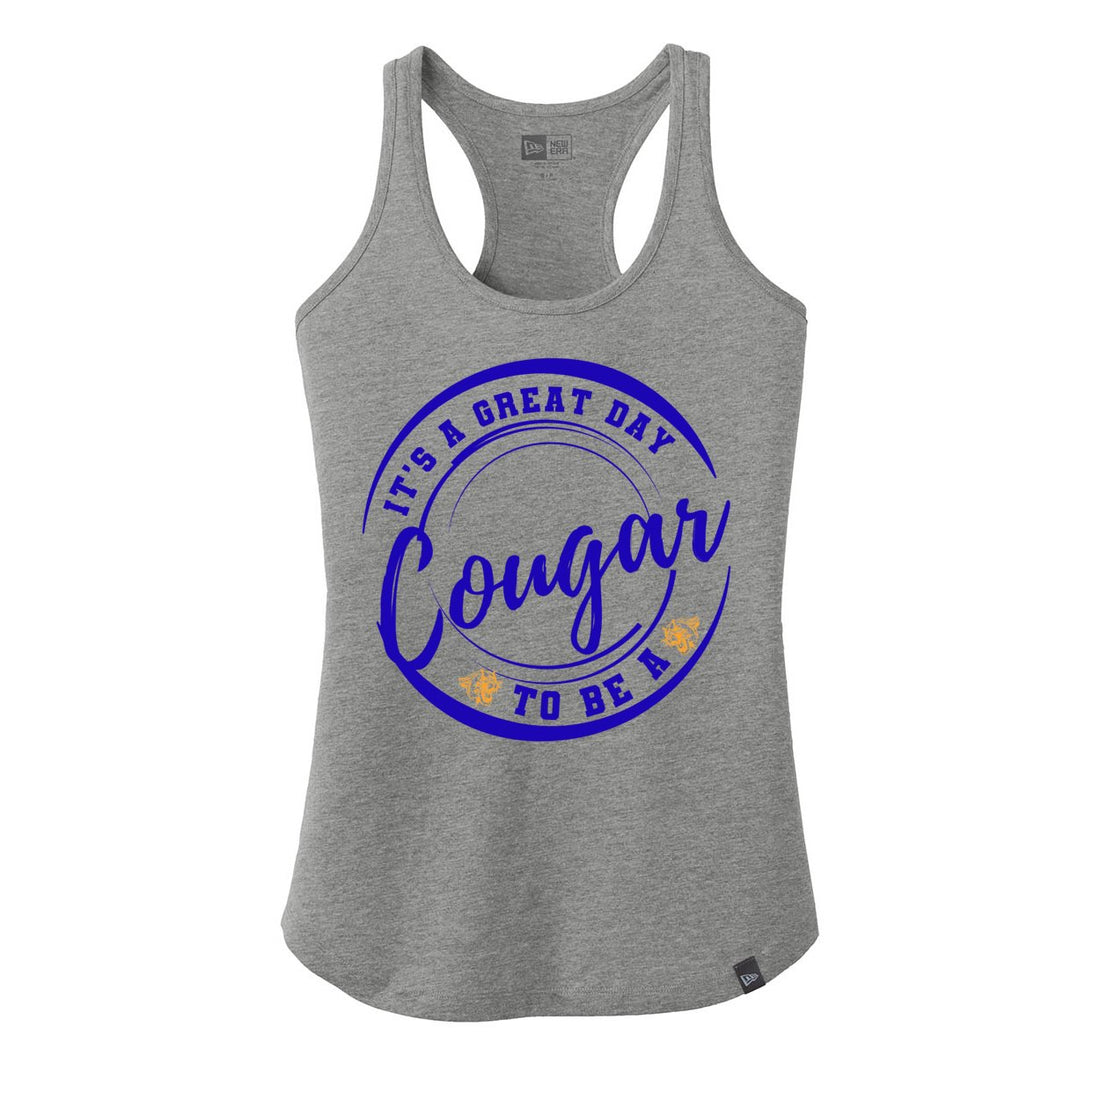 Great Day to be a Cougar Racerback Tank - Tank Tops - Positively Sassy - Great Day to be a Cougar Racerback Tank